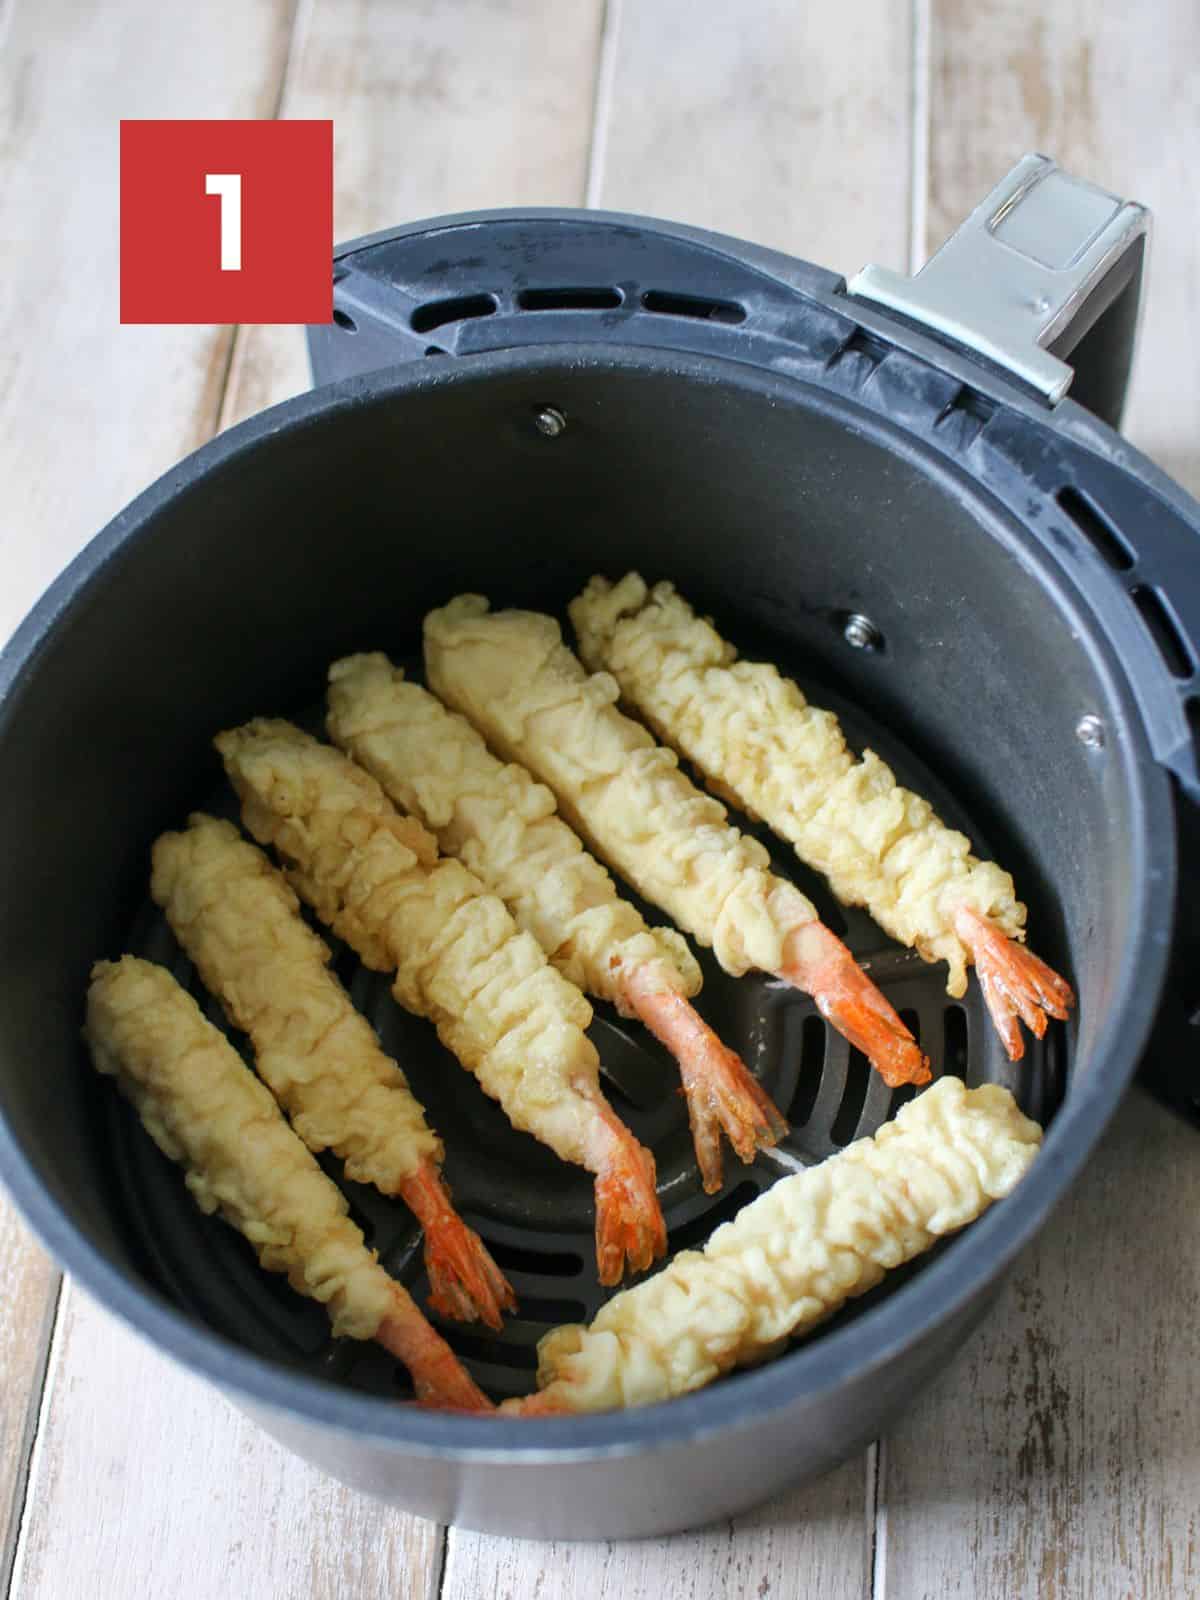 Frozen tempura shrimp placed in an air fryer basked. In the upper left corner is a white '1' in a dark red square.